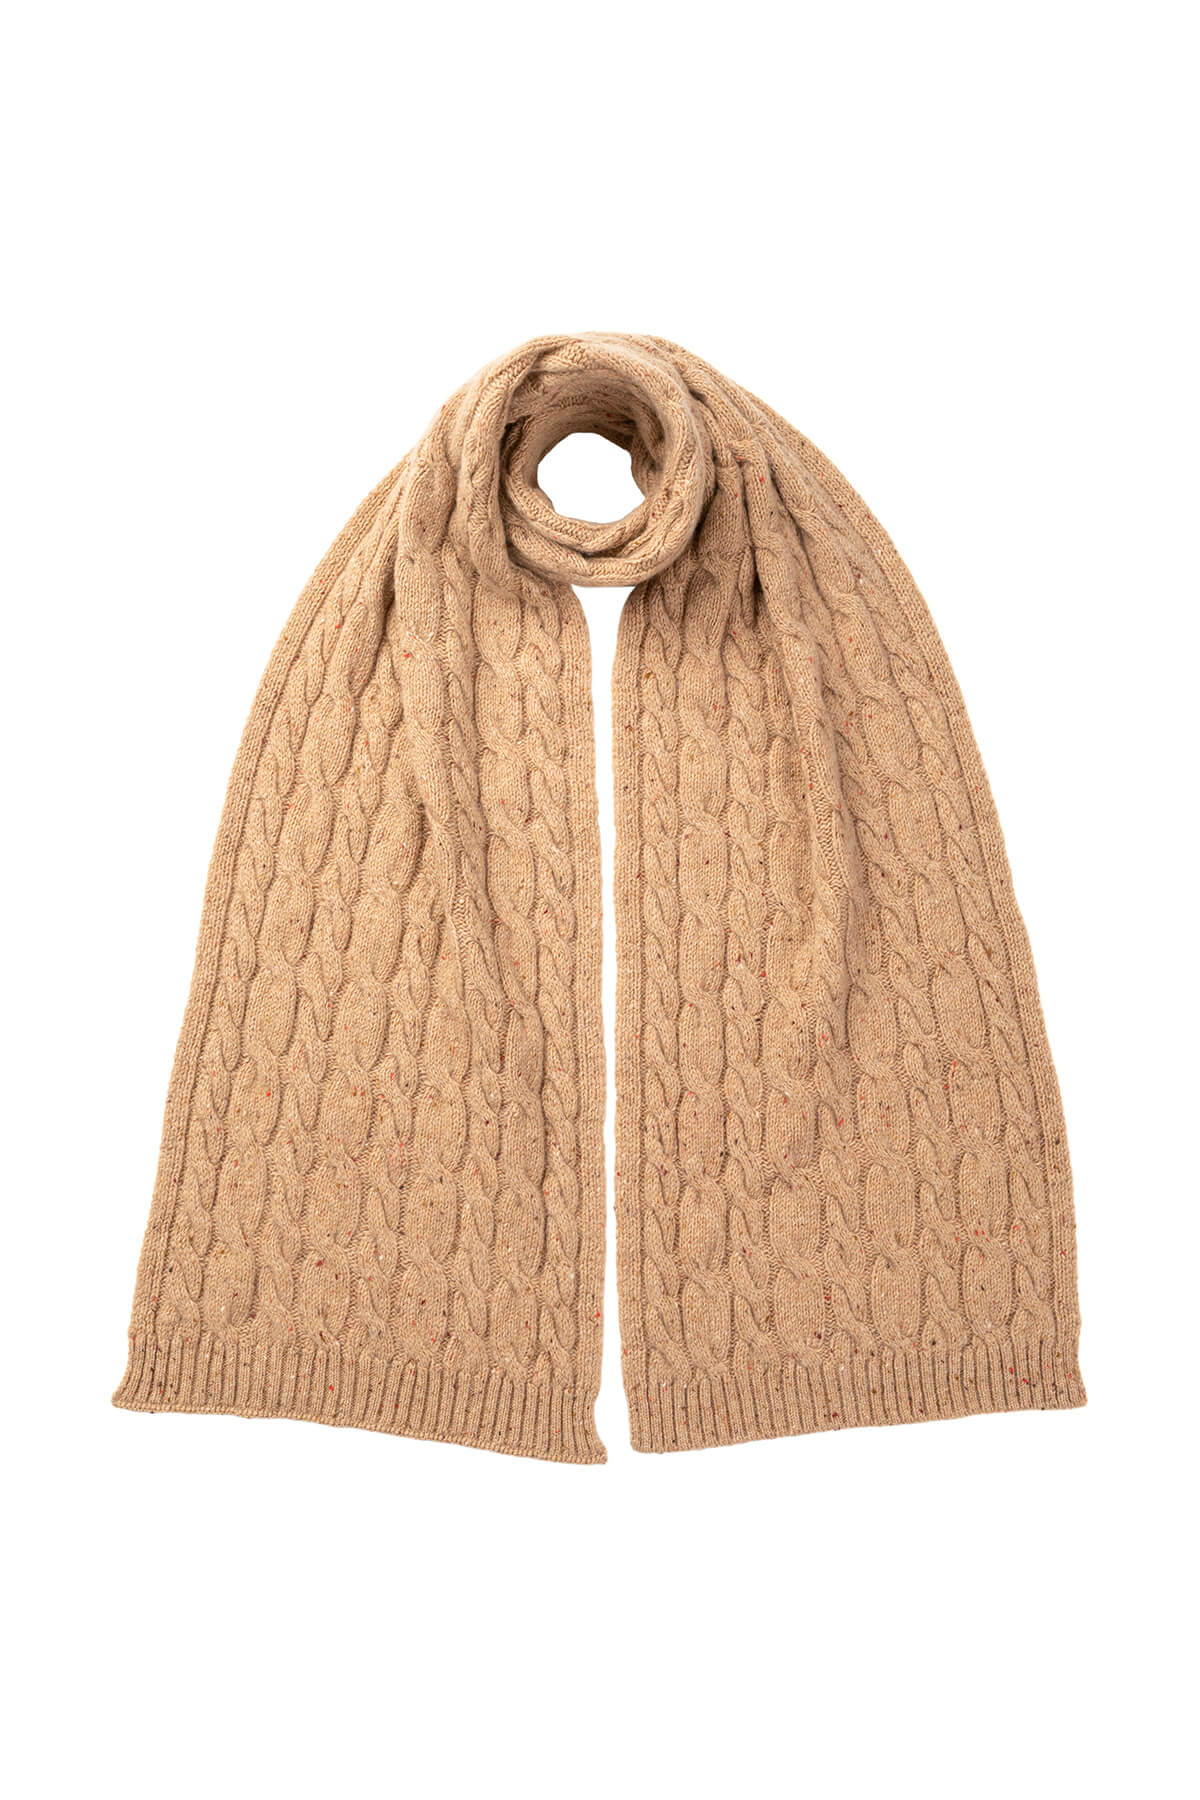 Johnstons of Elgin’s Camel Donegal Cashmere Donegal Cable Scarf on a white background HAC03311004507